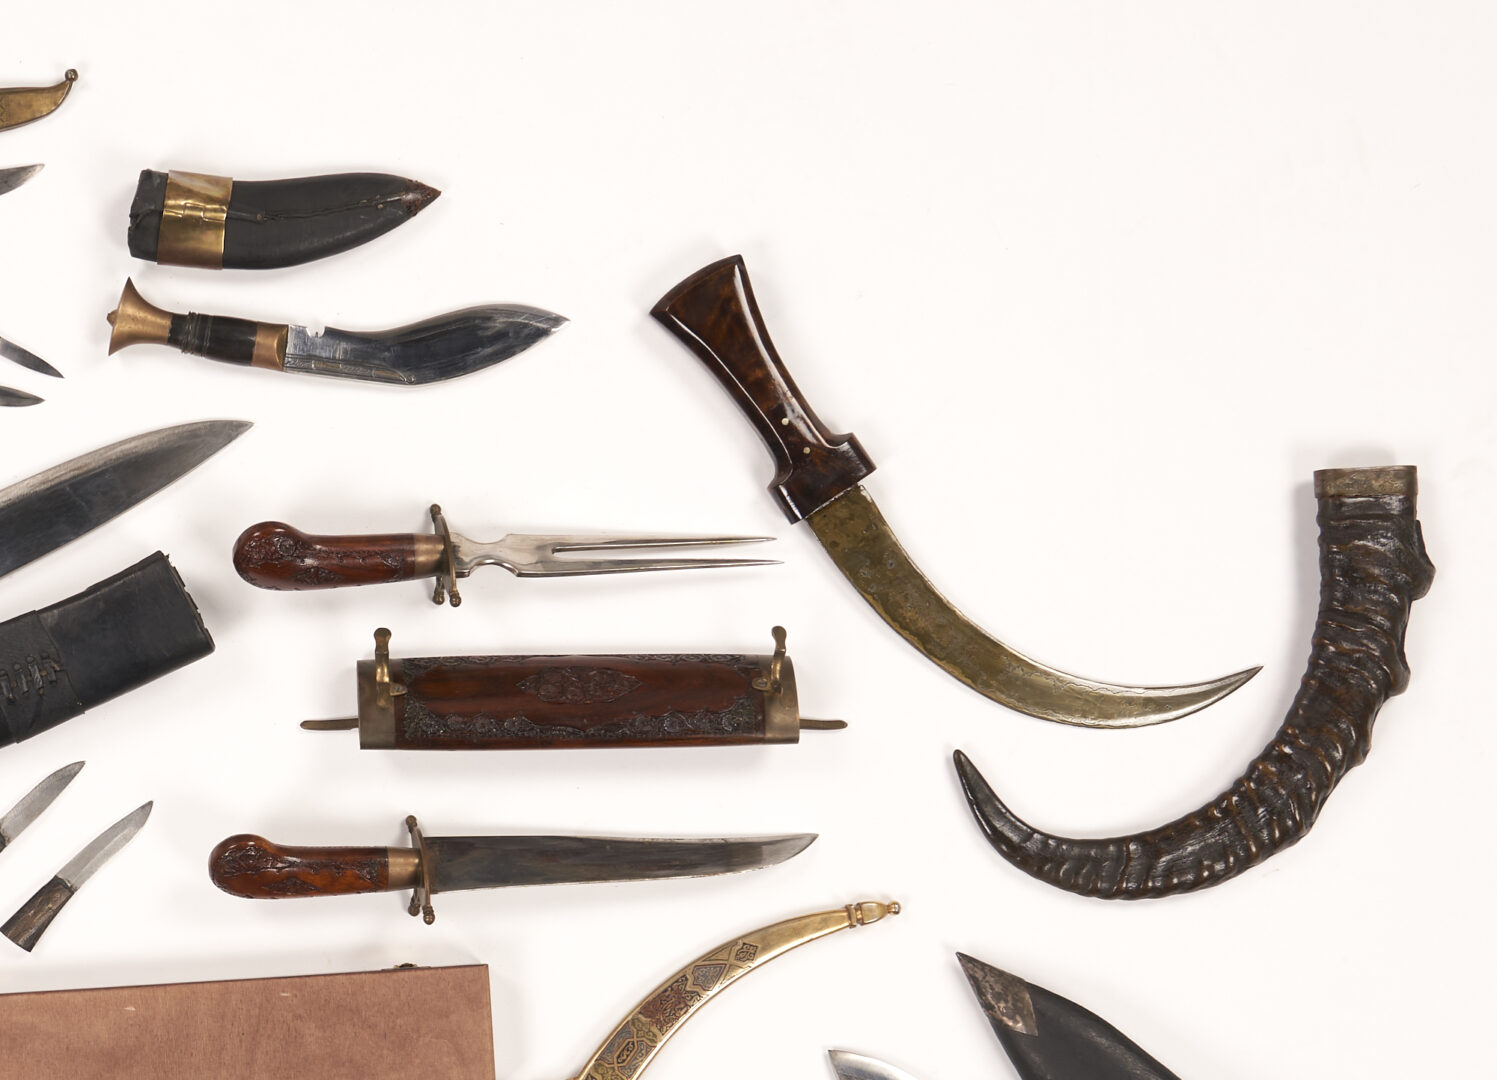 Lot 608: 21 Asst. European, Central American, & Middle Eastern Knives